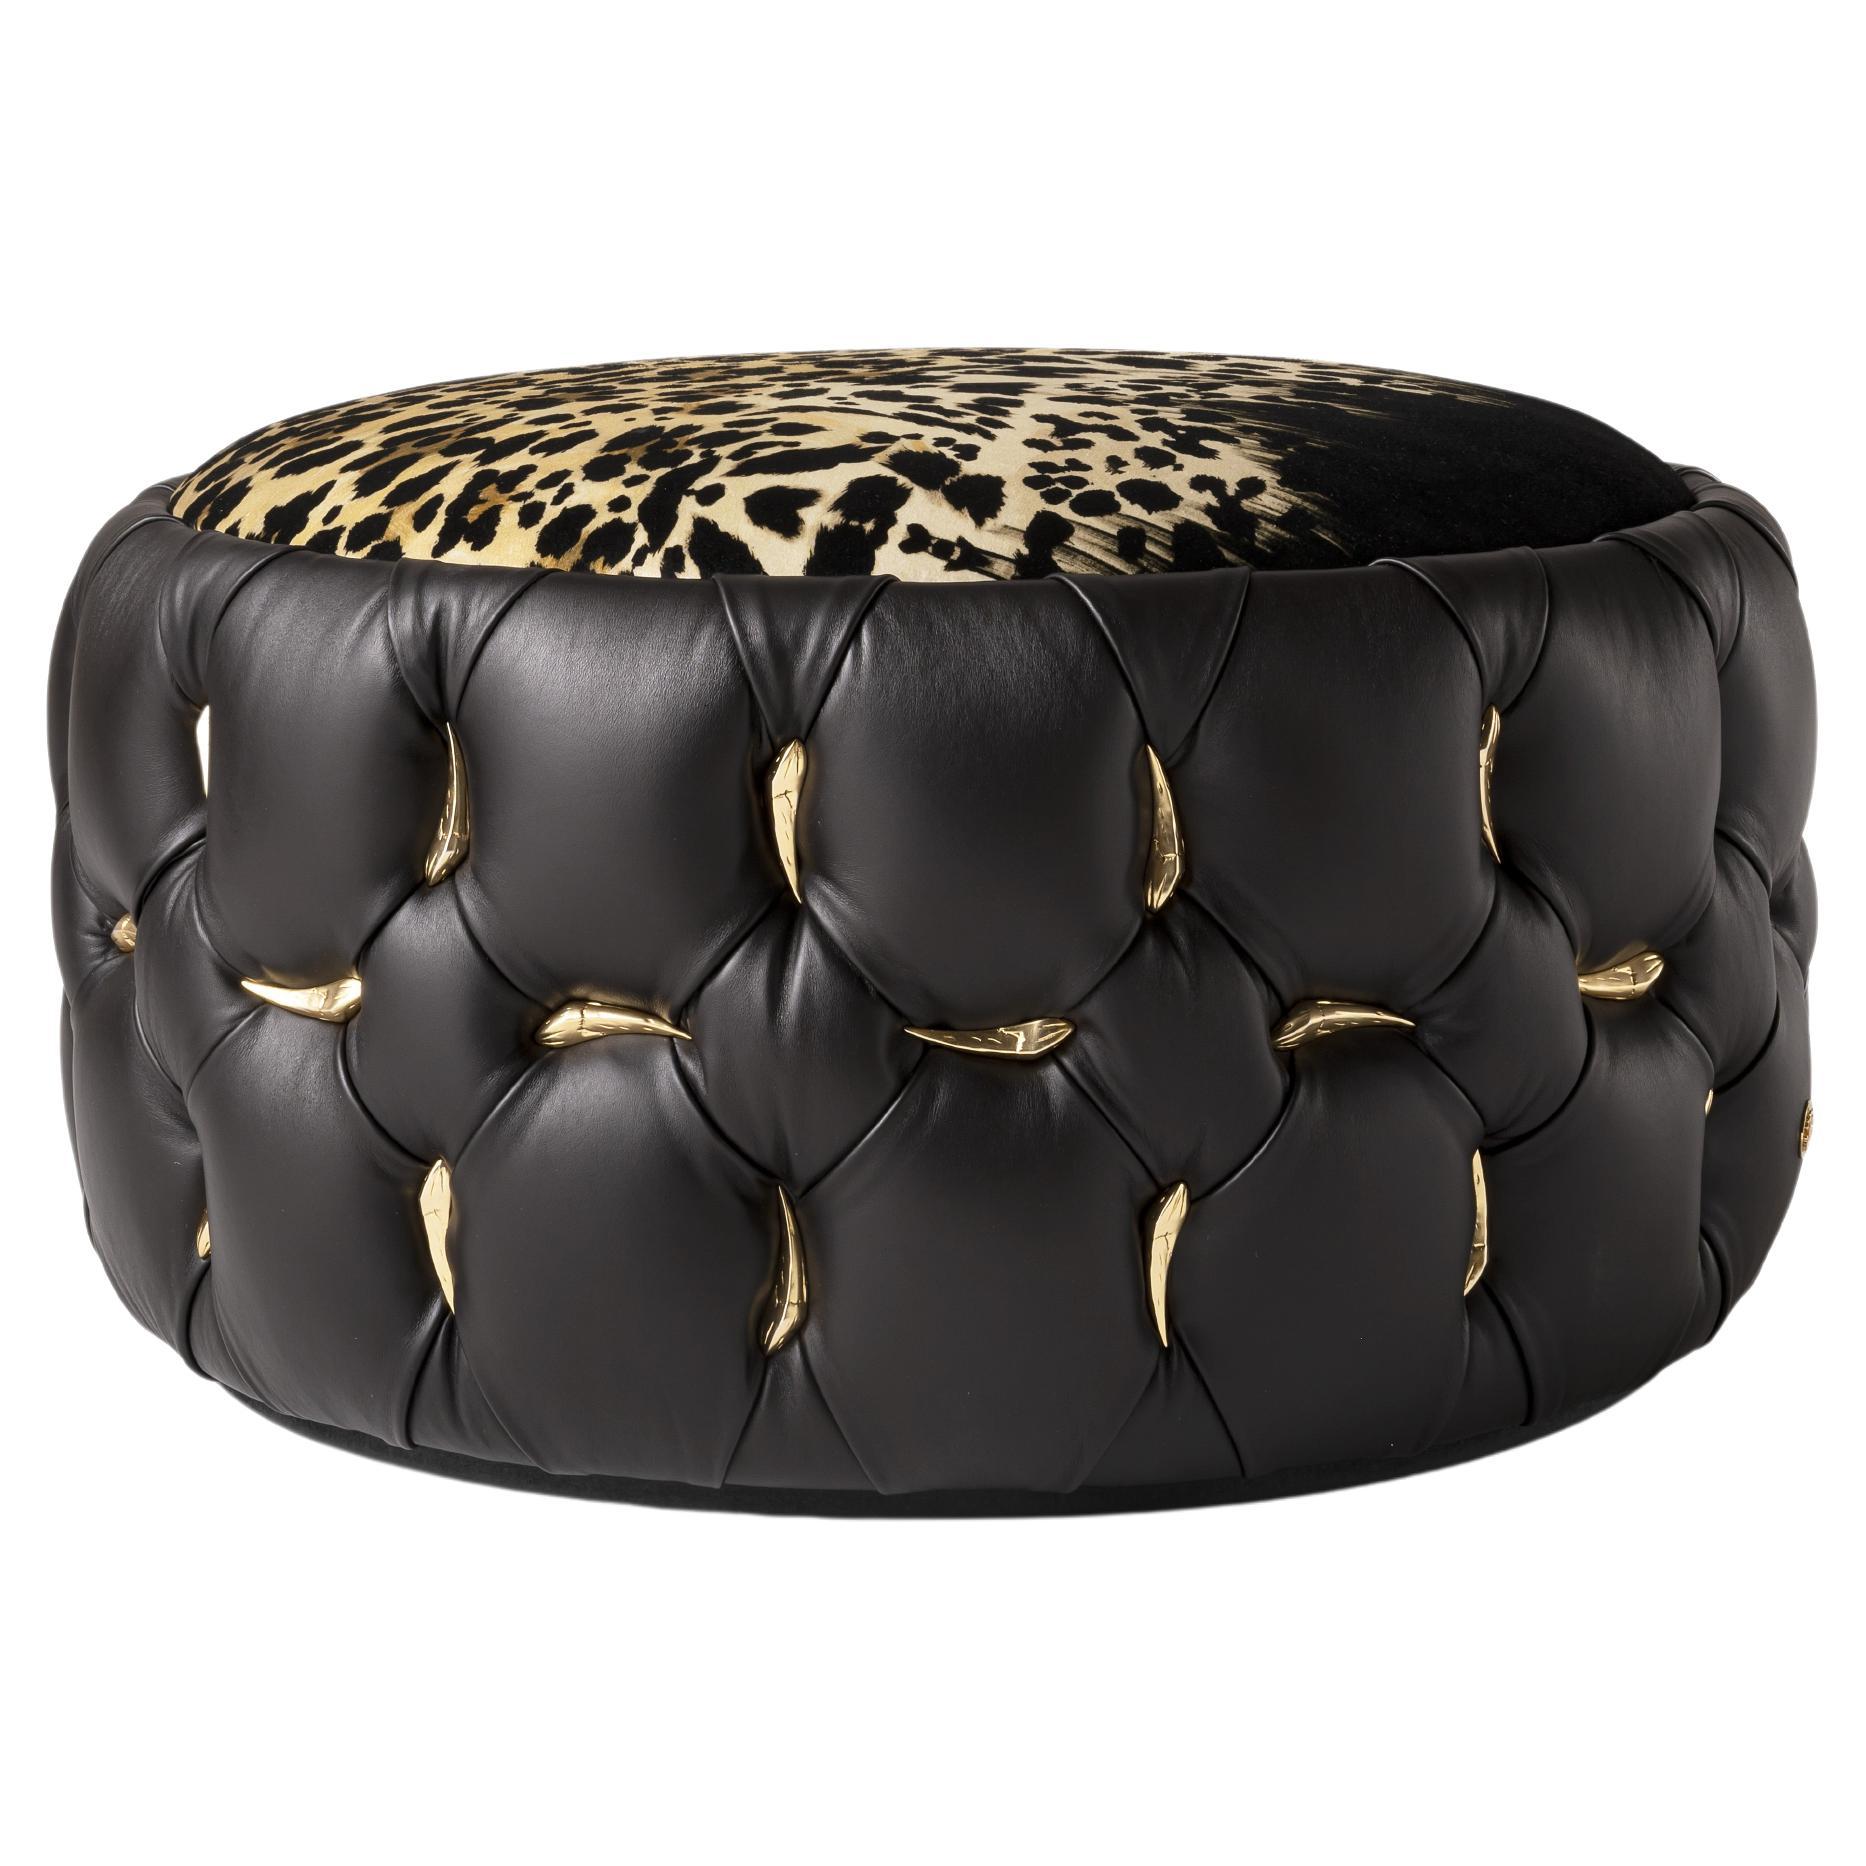 21st Century Wild Pouf in Fabric and Leather by Roberto Cavalli Home Interiors